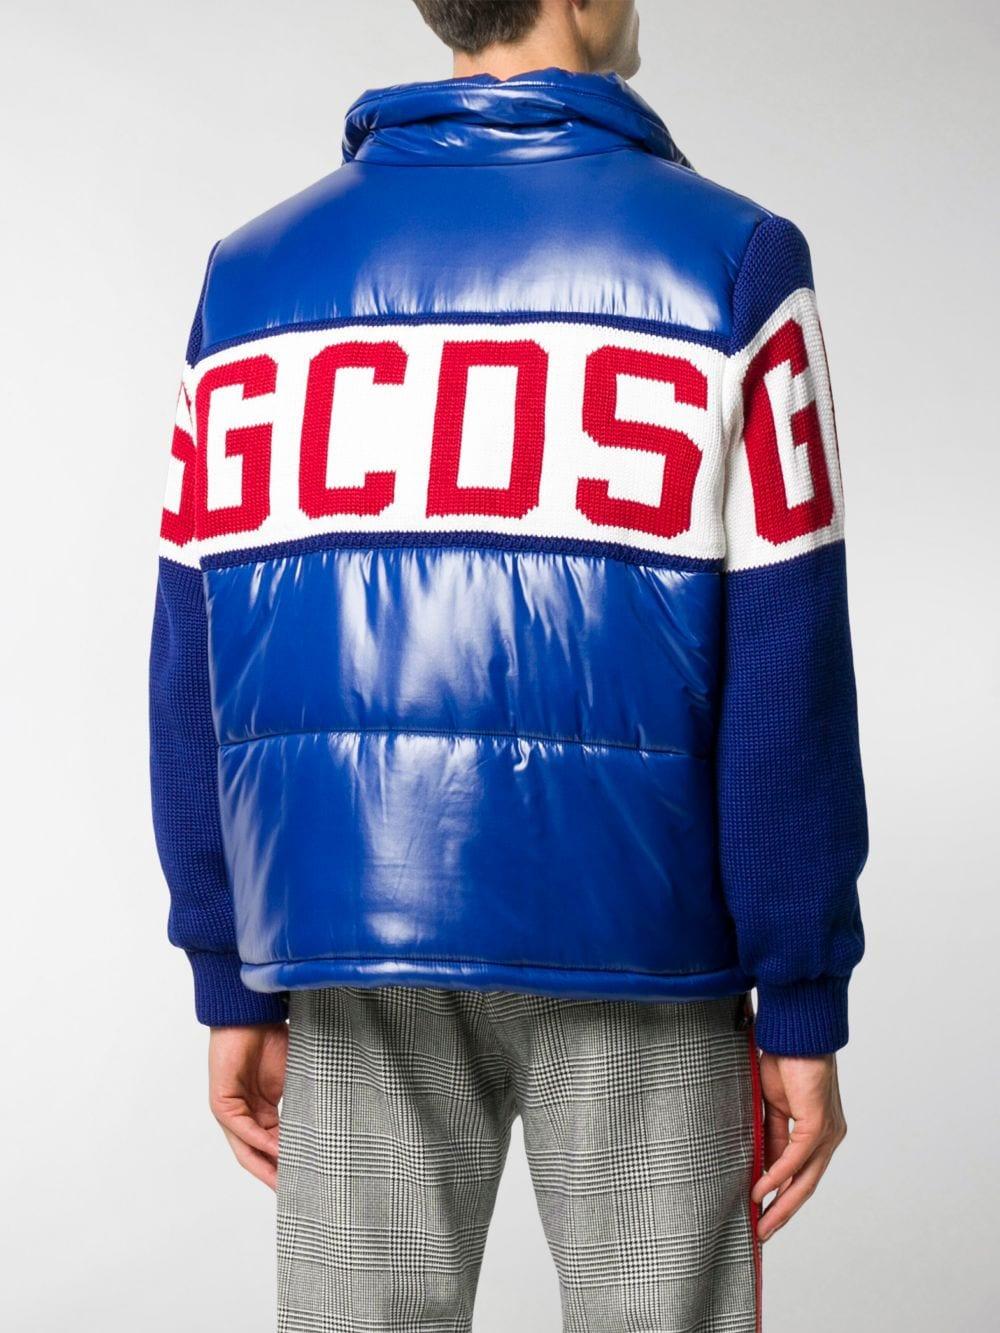 Gcds Knitted Panel Puffer Jacket in Blue for Men - Lyst